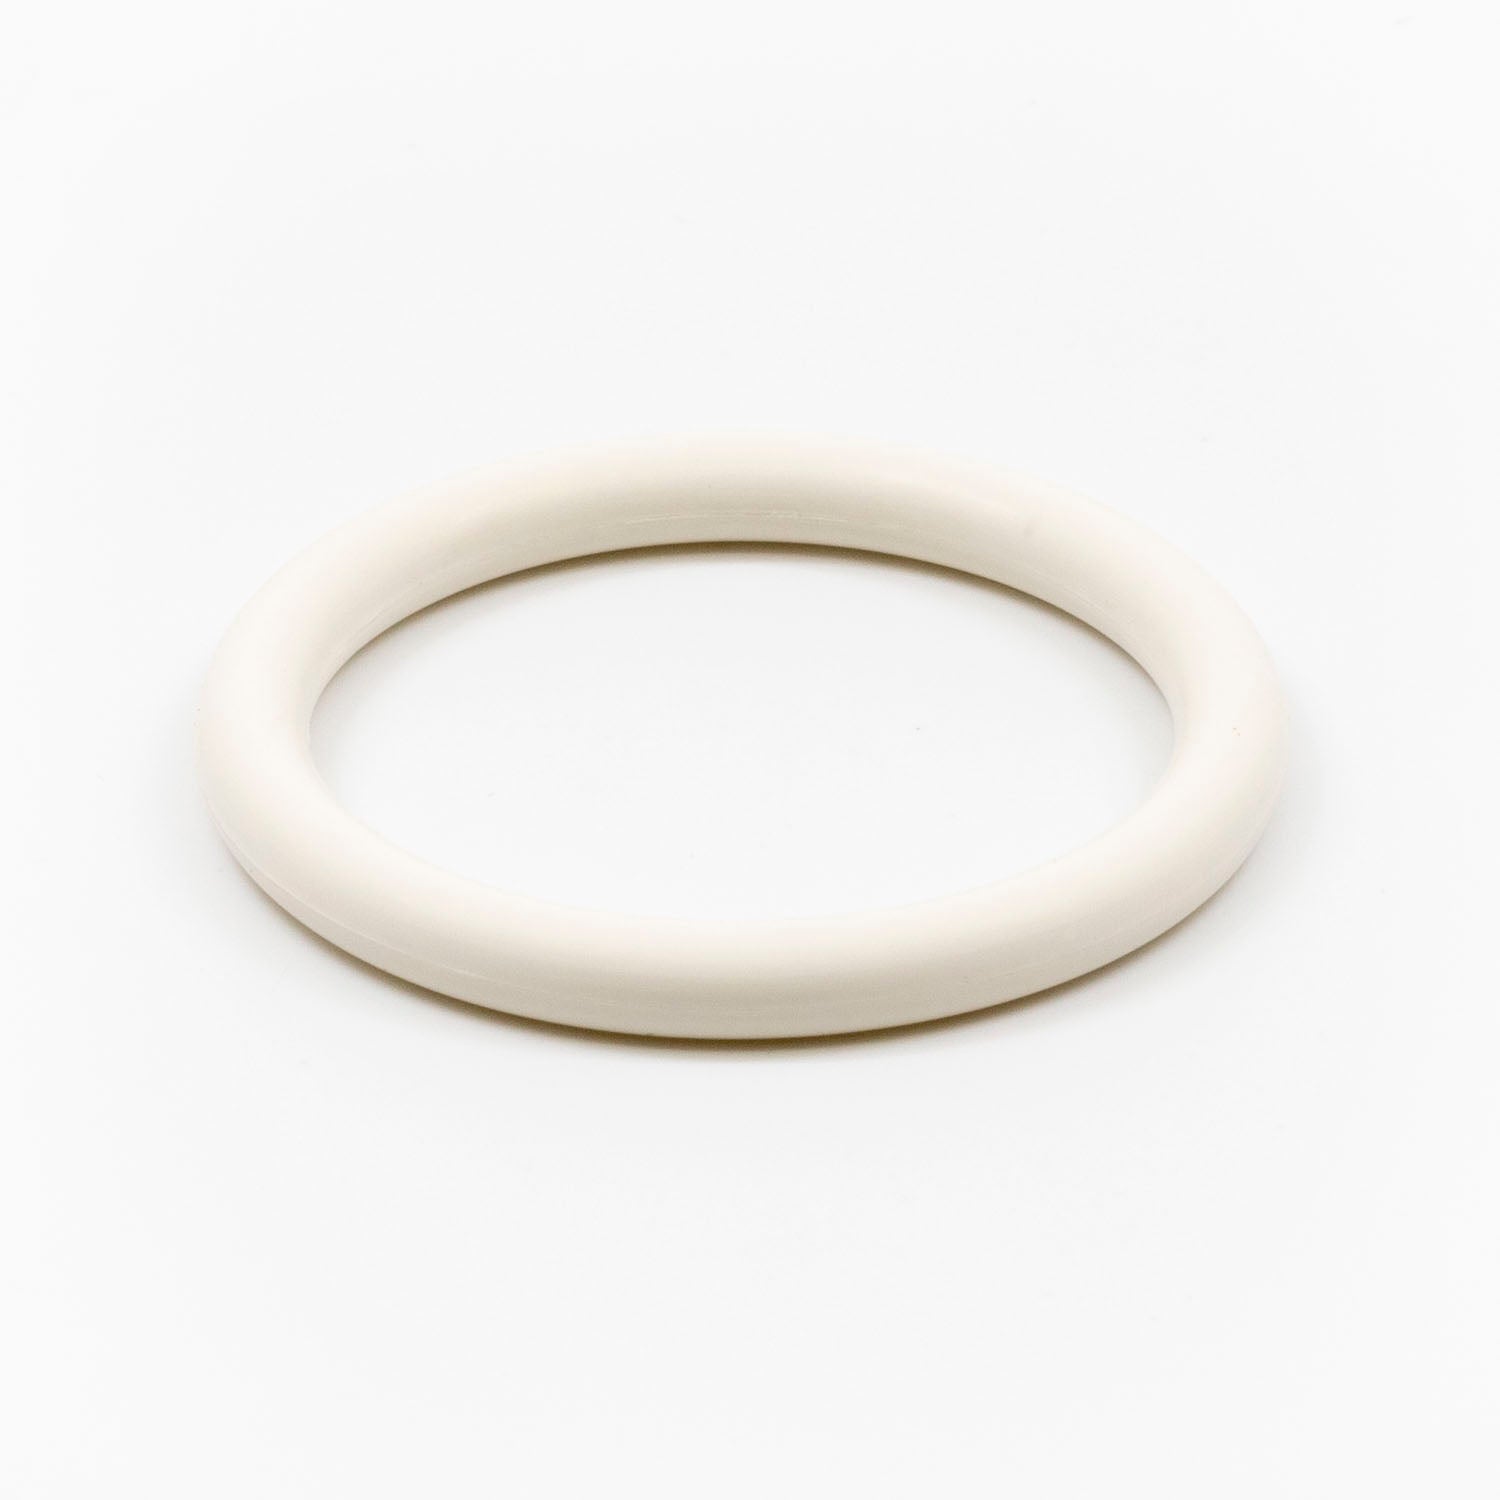 Oring - White - for Mouthpiece or Core